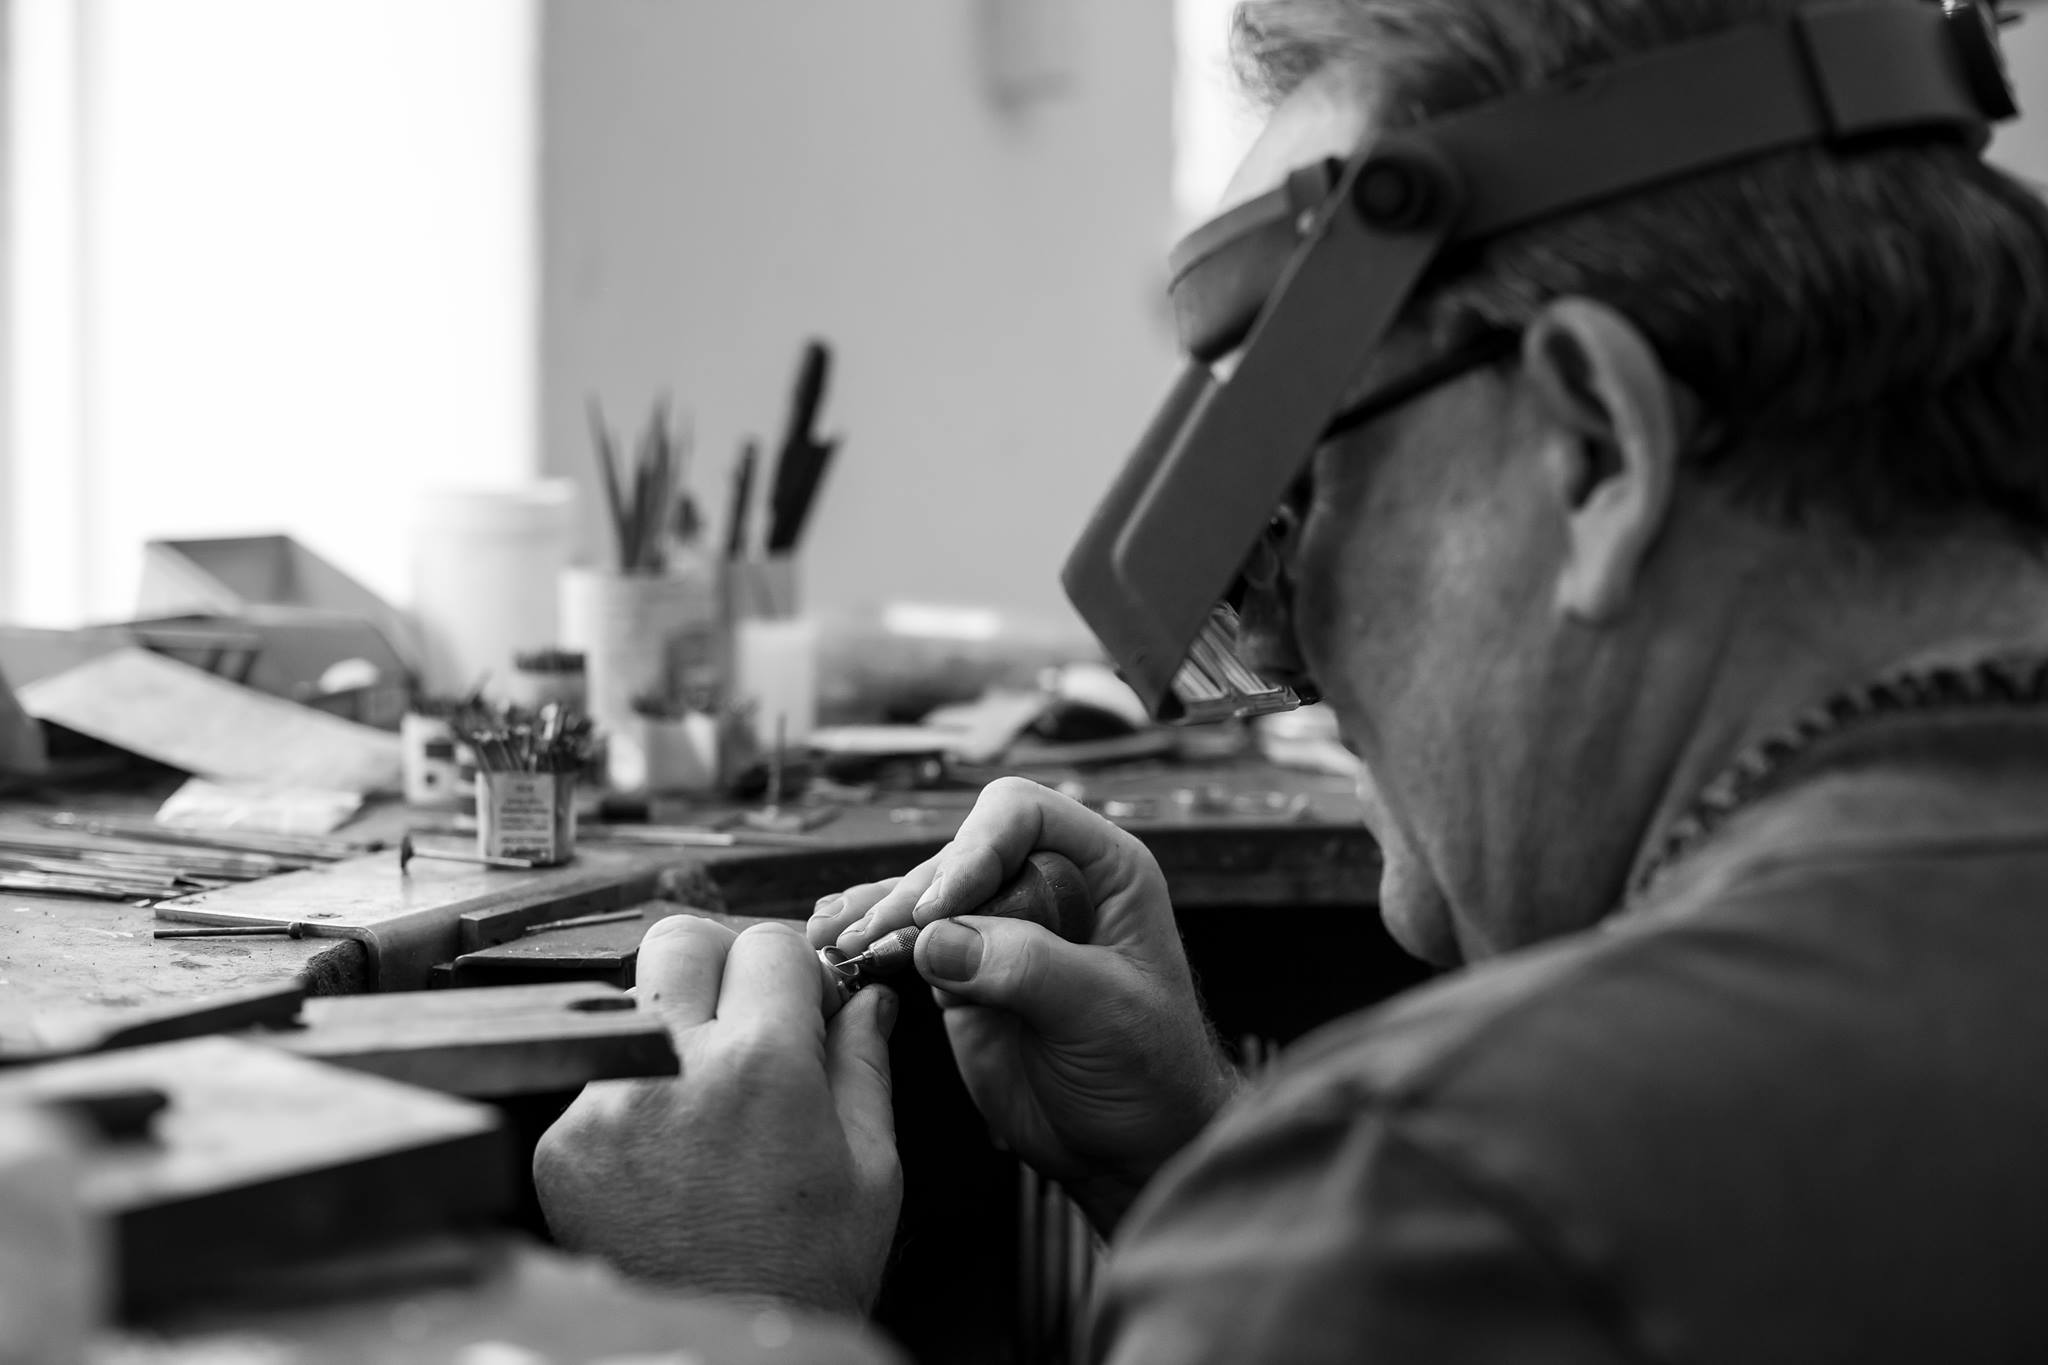 jeweller working at his workbench